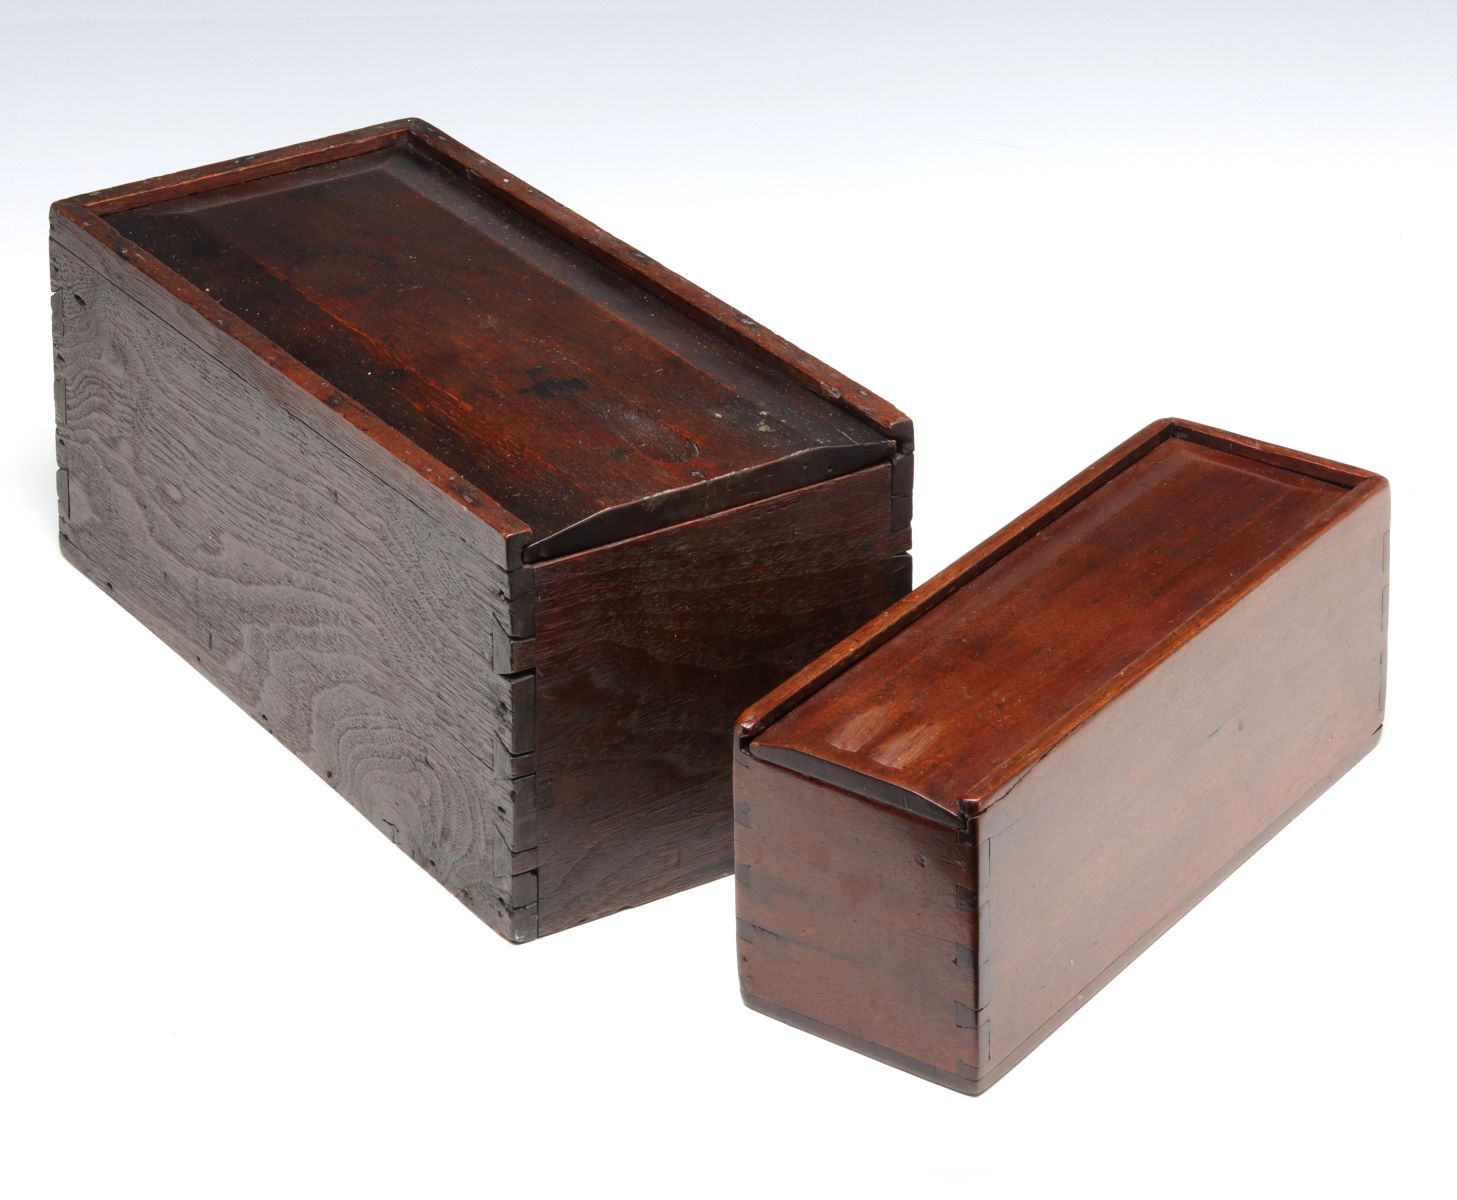 TWO GOOD 19TH C. AMERICAN SLIDE LID CANDLE BOXES